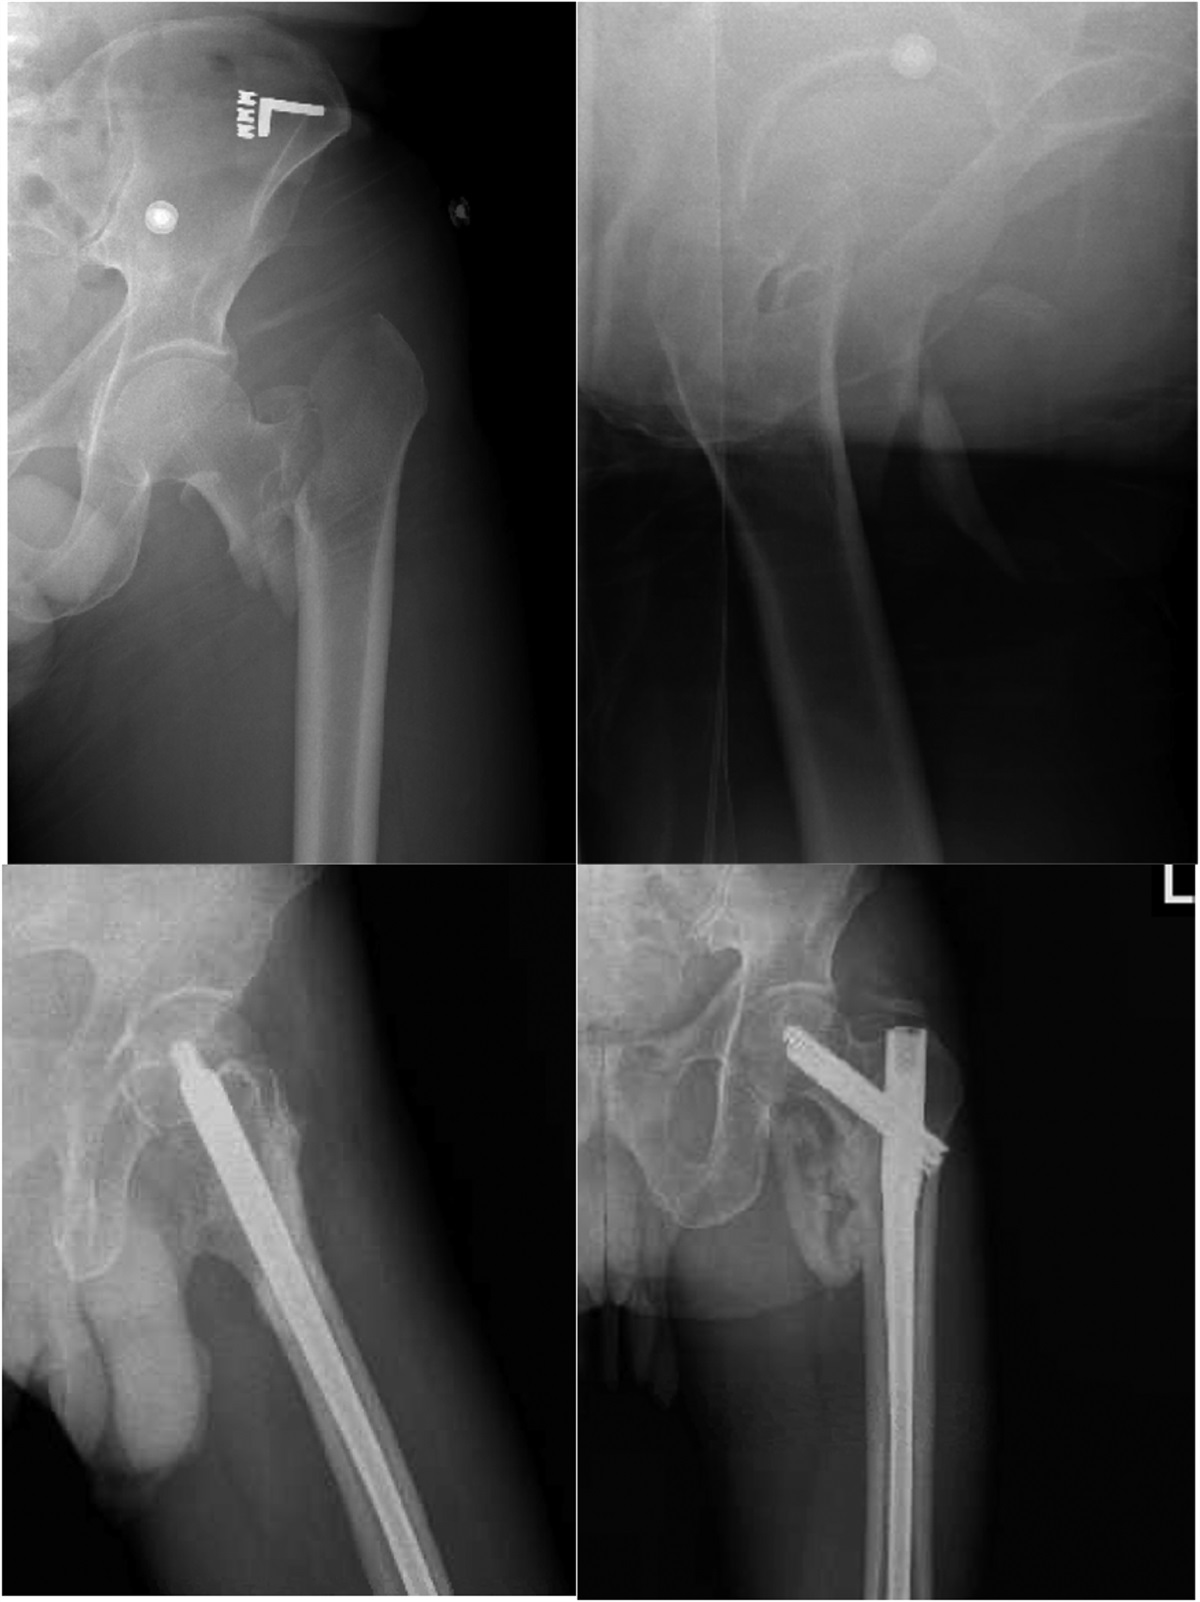 High- Versus Low-Energy Intertrochanteric Hip Fractures in Young Patients: Injury Characteristics and Factors Associated With Complications